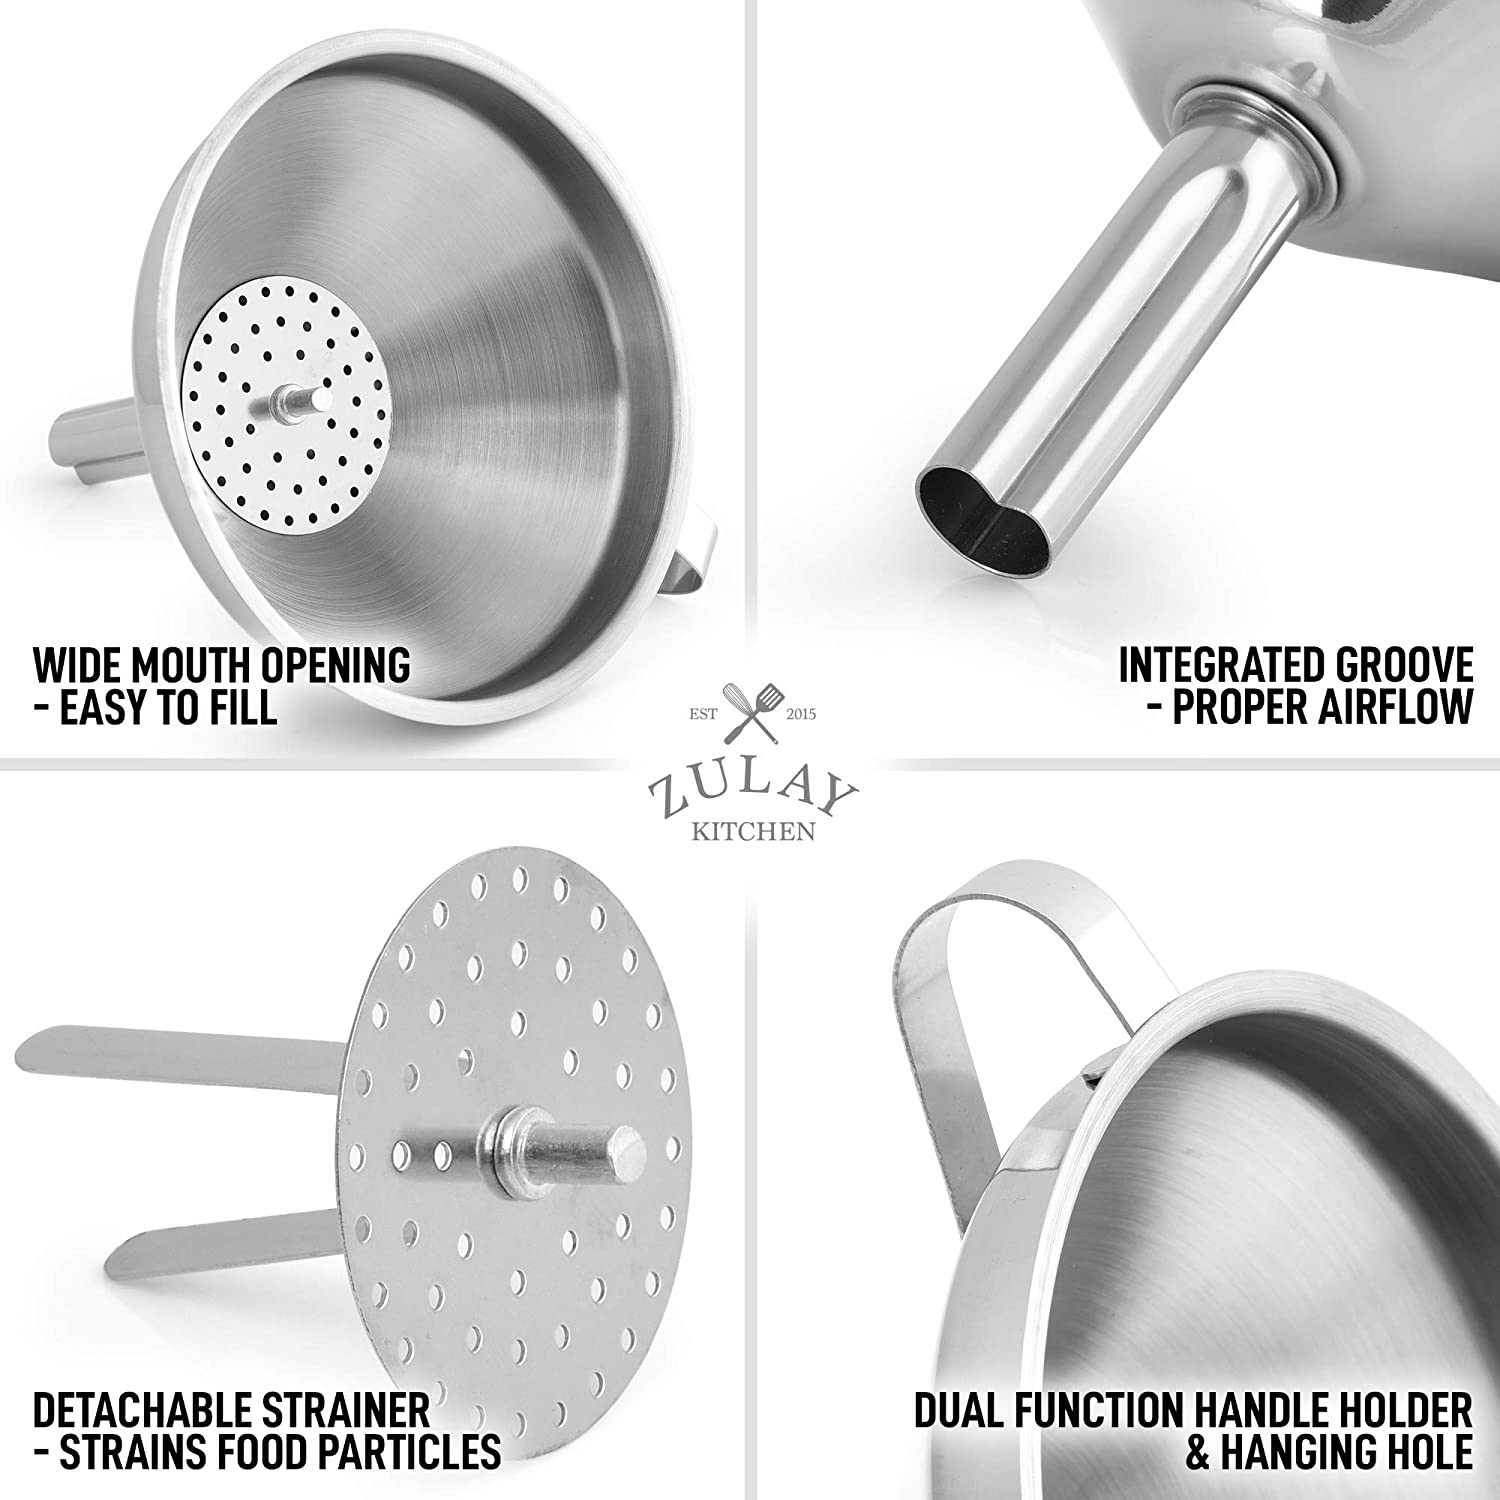 Kitchen Funnel With Removable Filter - Zulay KitchenZulay Kitchen